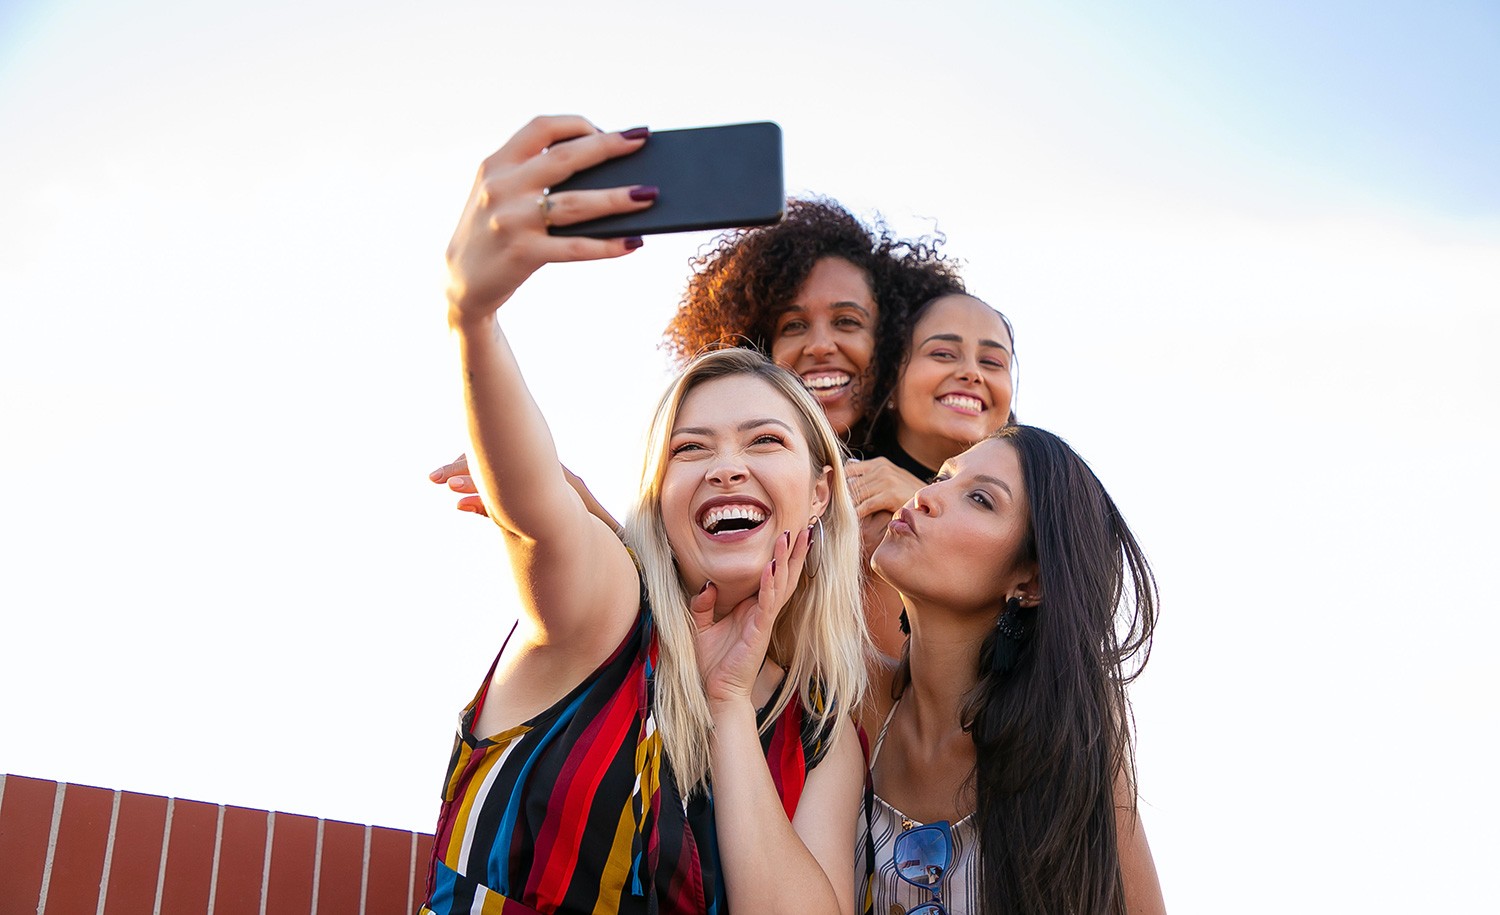 An extroverted introvert takes a selfie with her friends